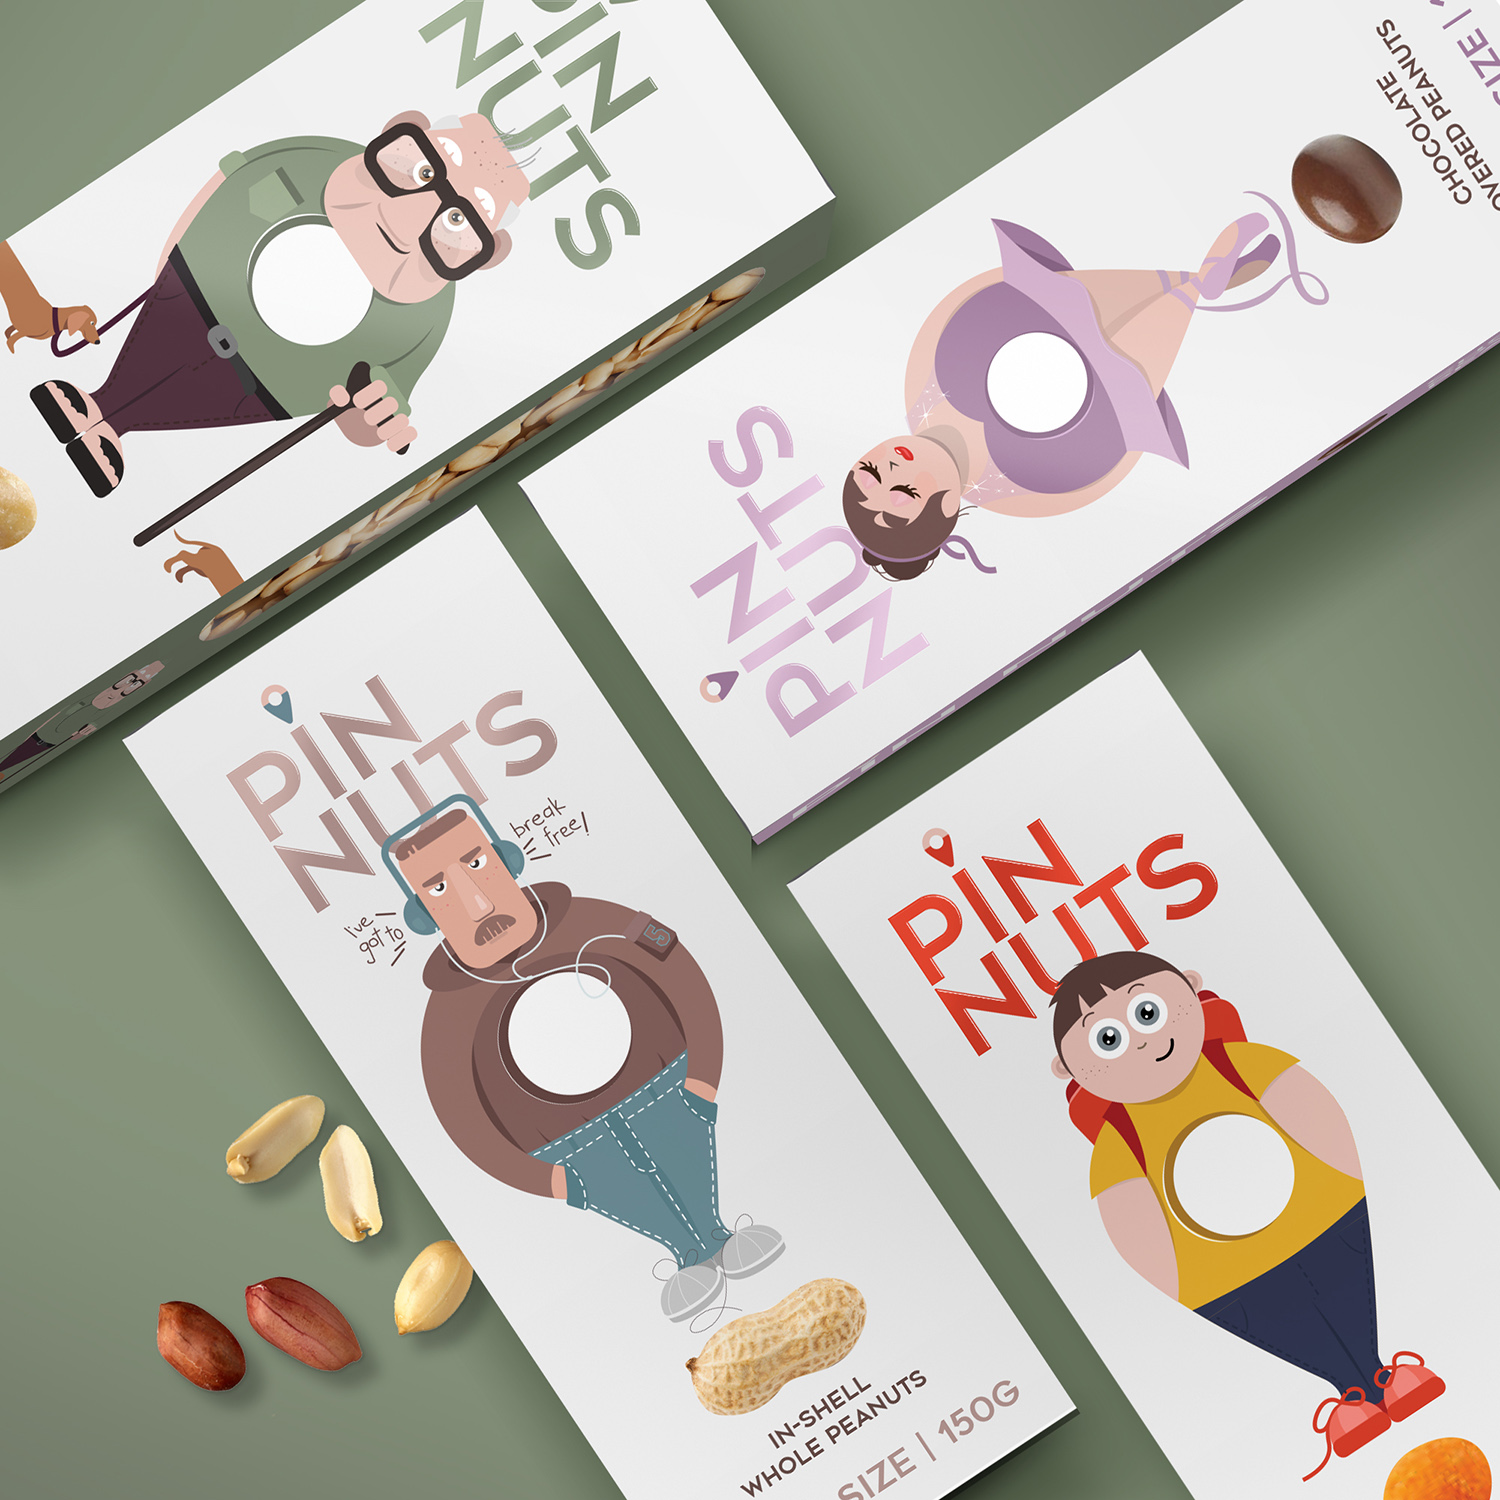 Pin Nuts Packaging Design Concept by Dalibor Smileski